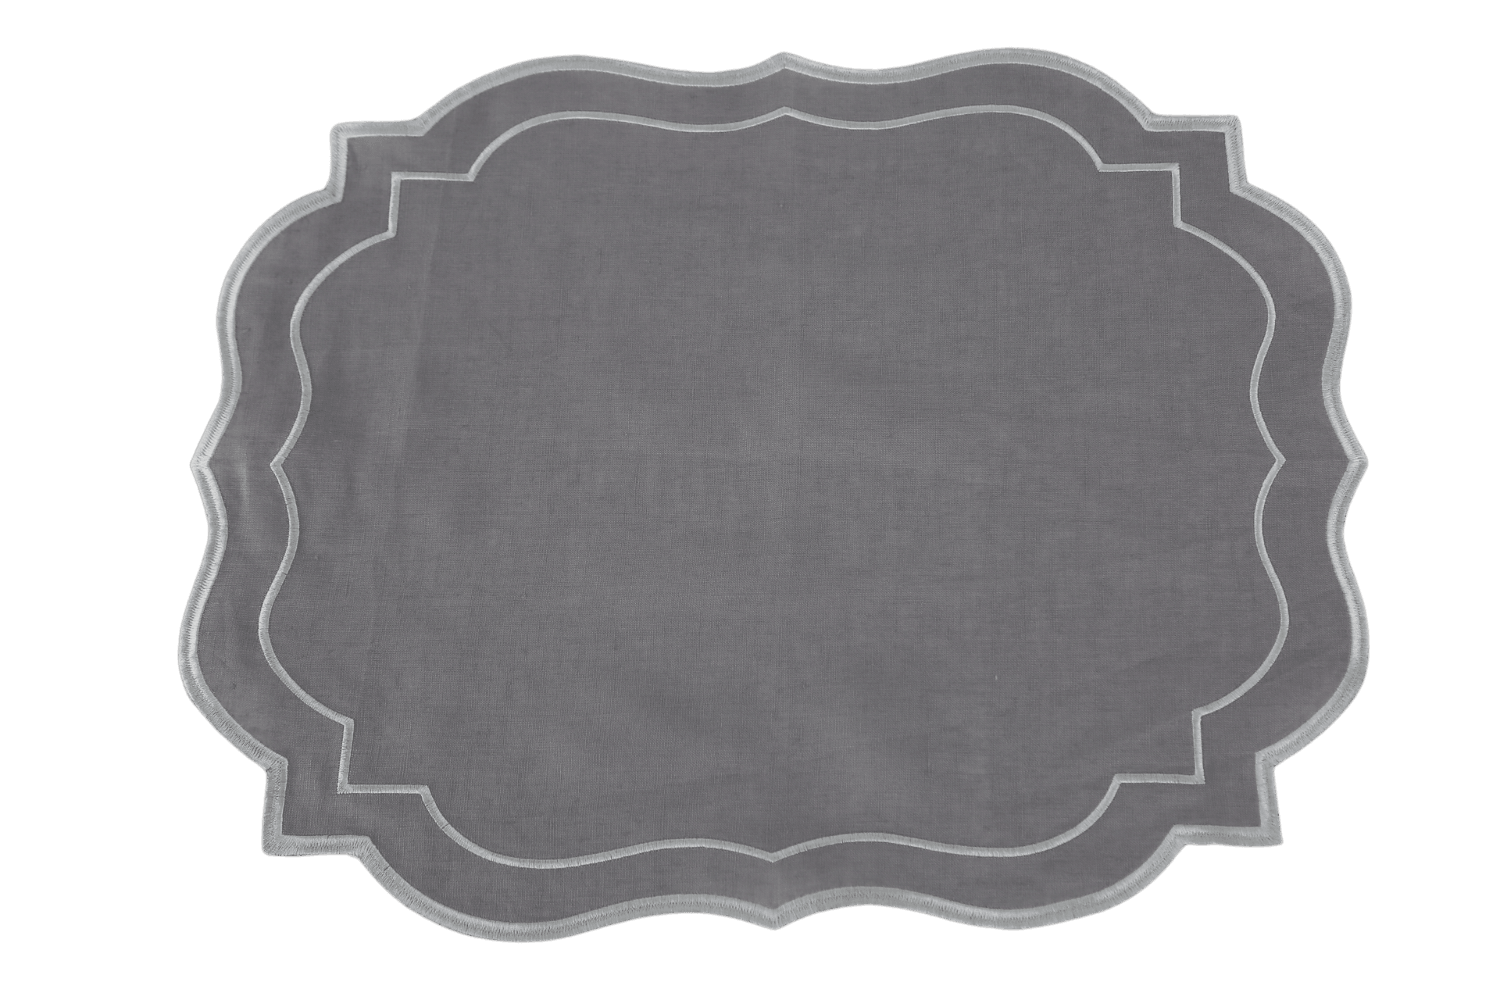 Scalloped linen placemats, set of 4, add elegance to your special table setups. Made of premium flax linen, ironing is suggested prior to use. 38 x 38cm.